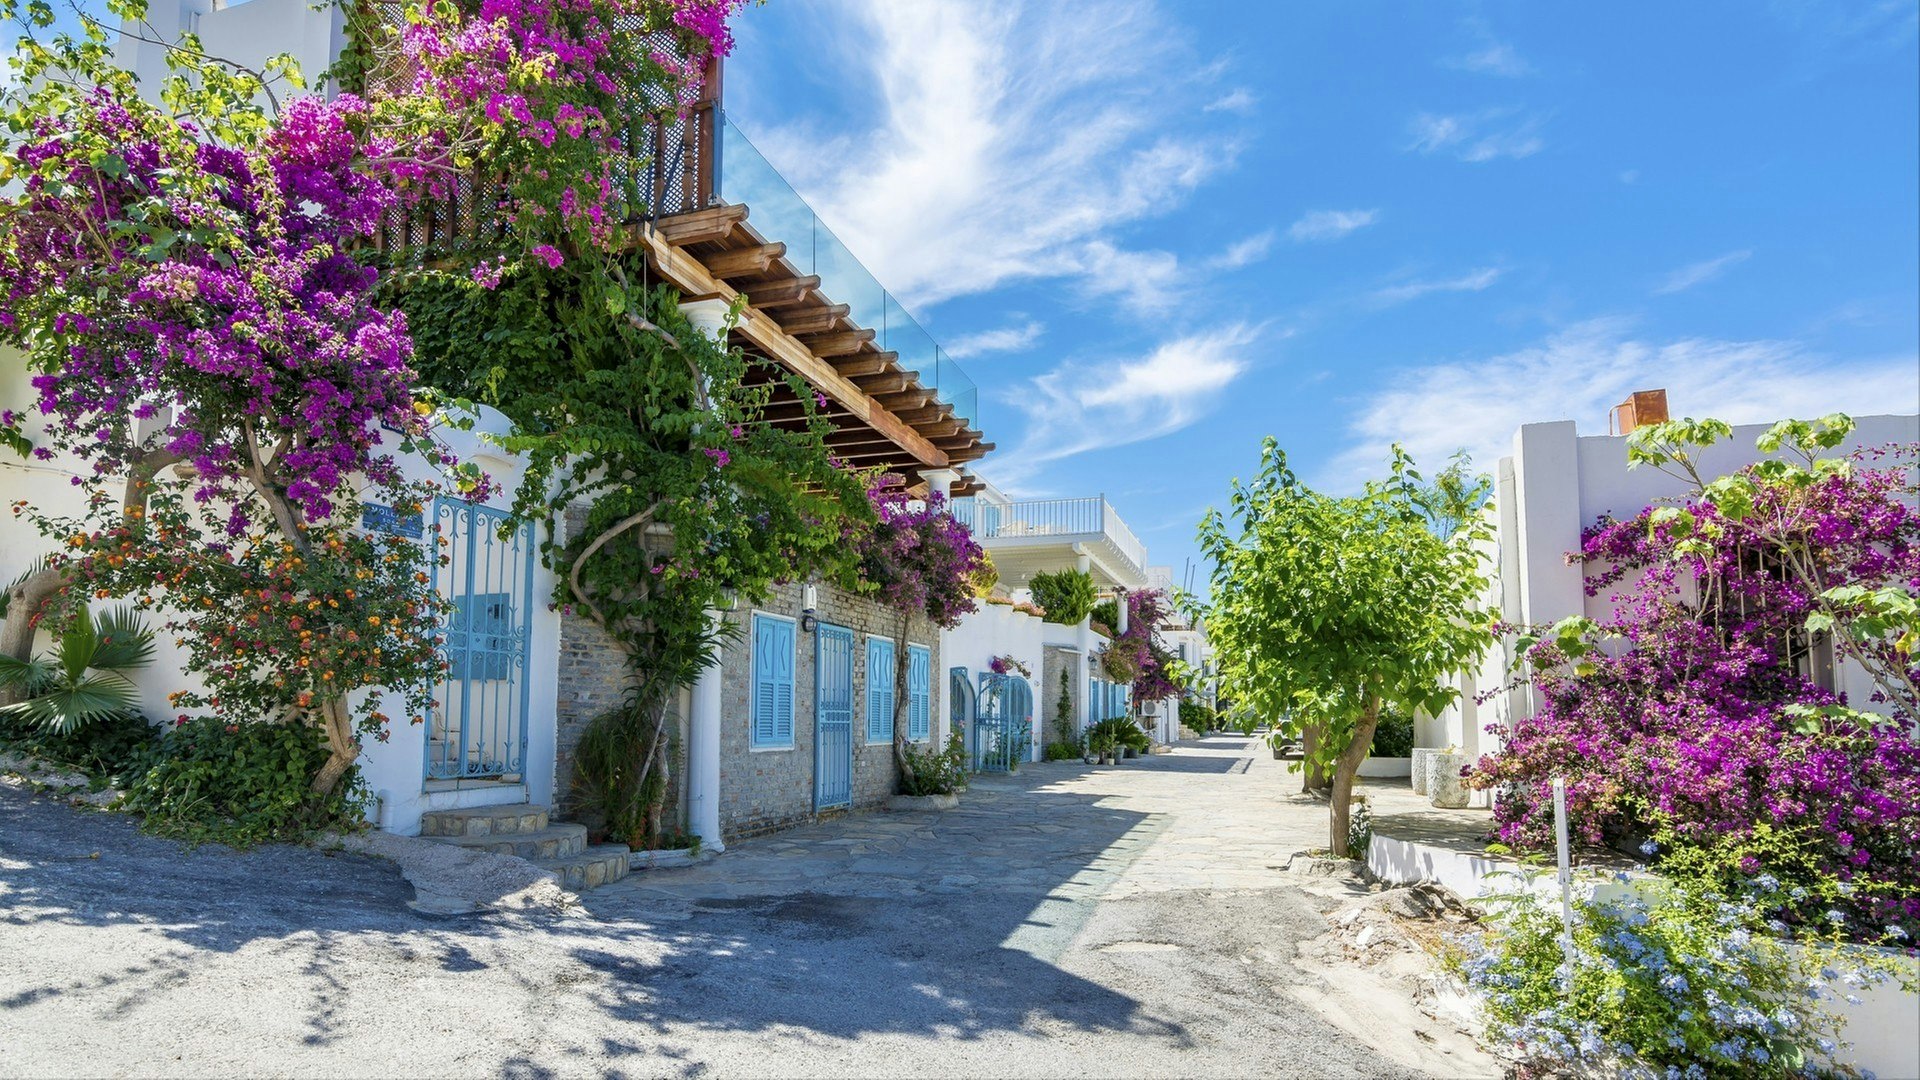 The streets of Bodrum